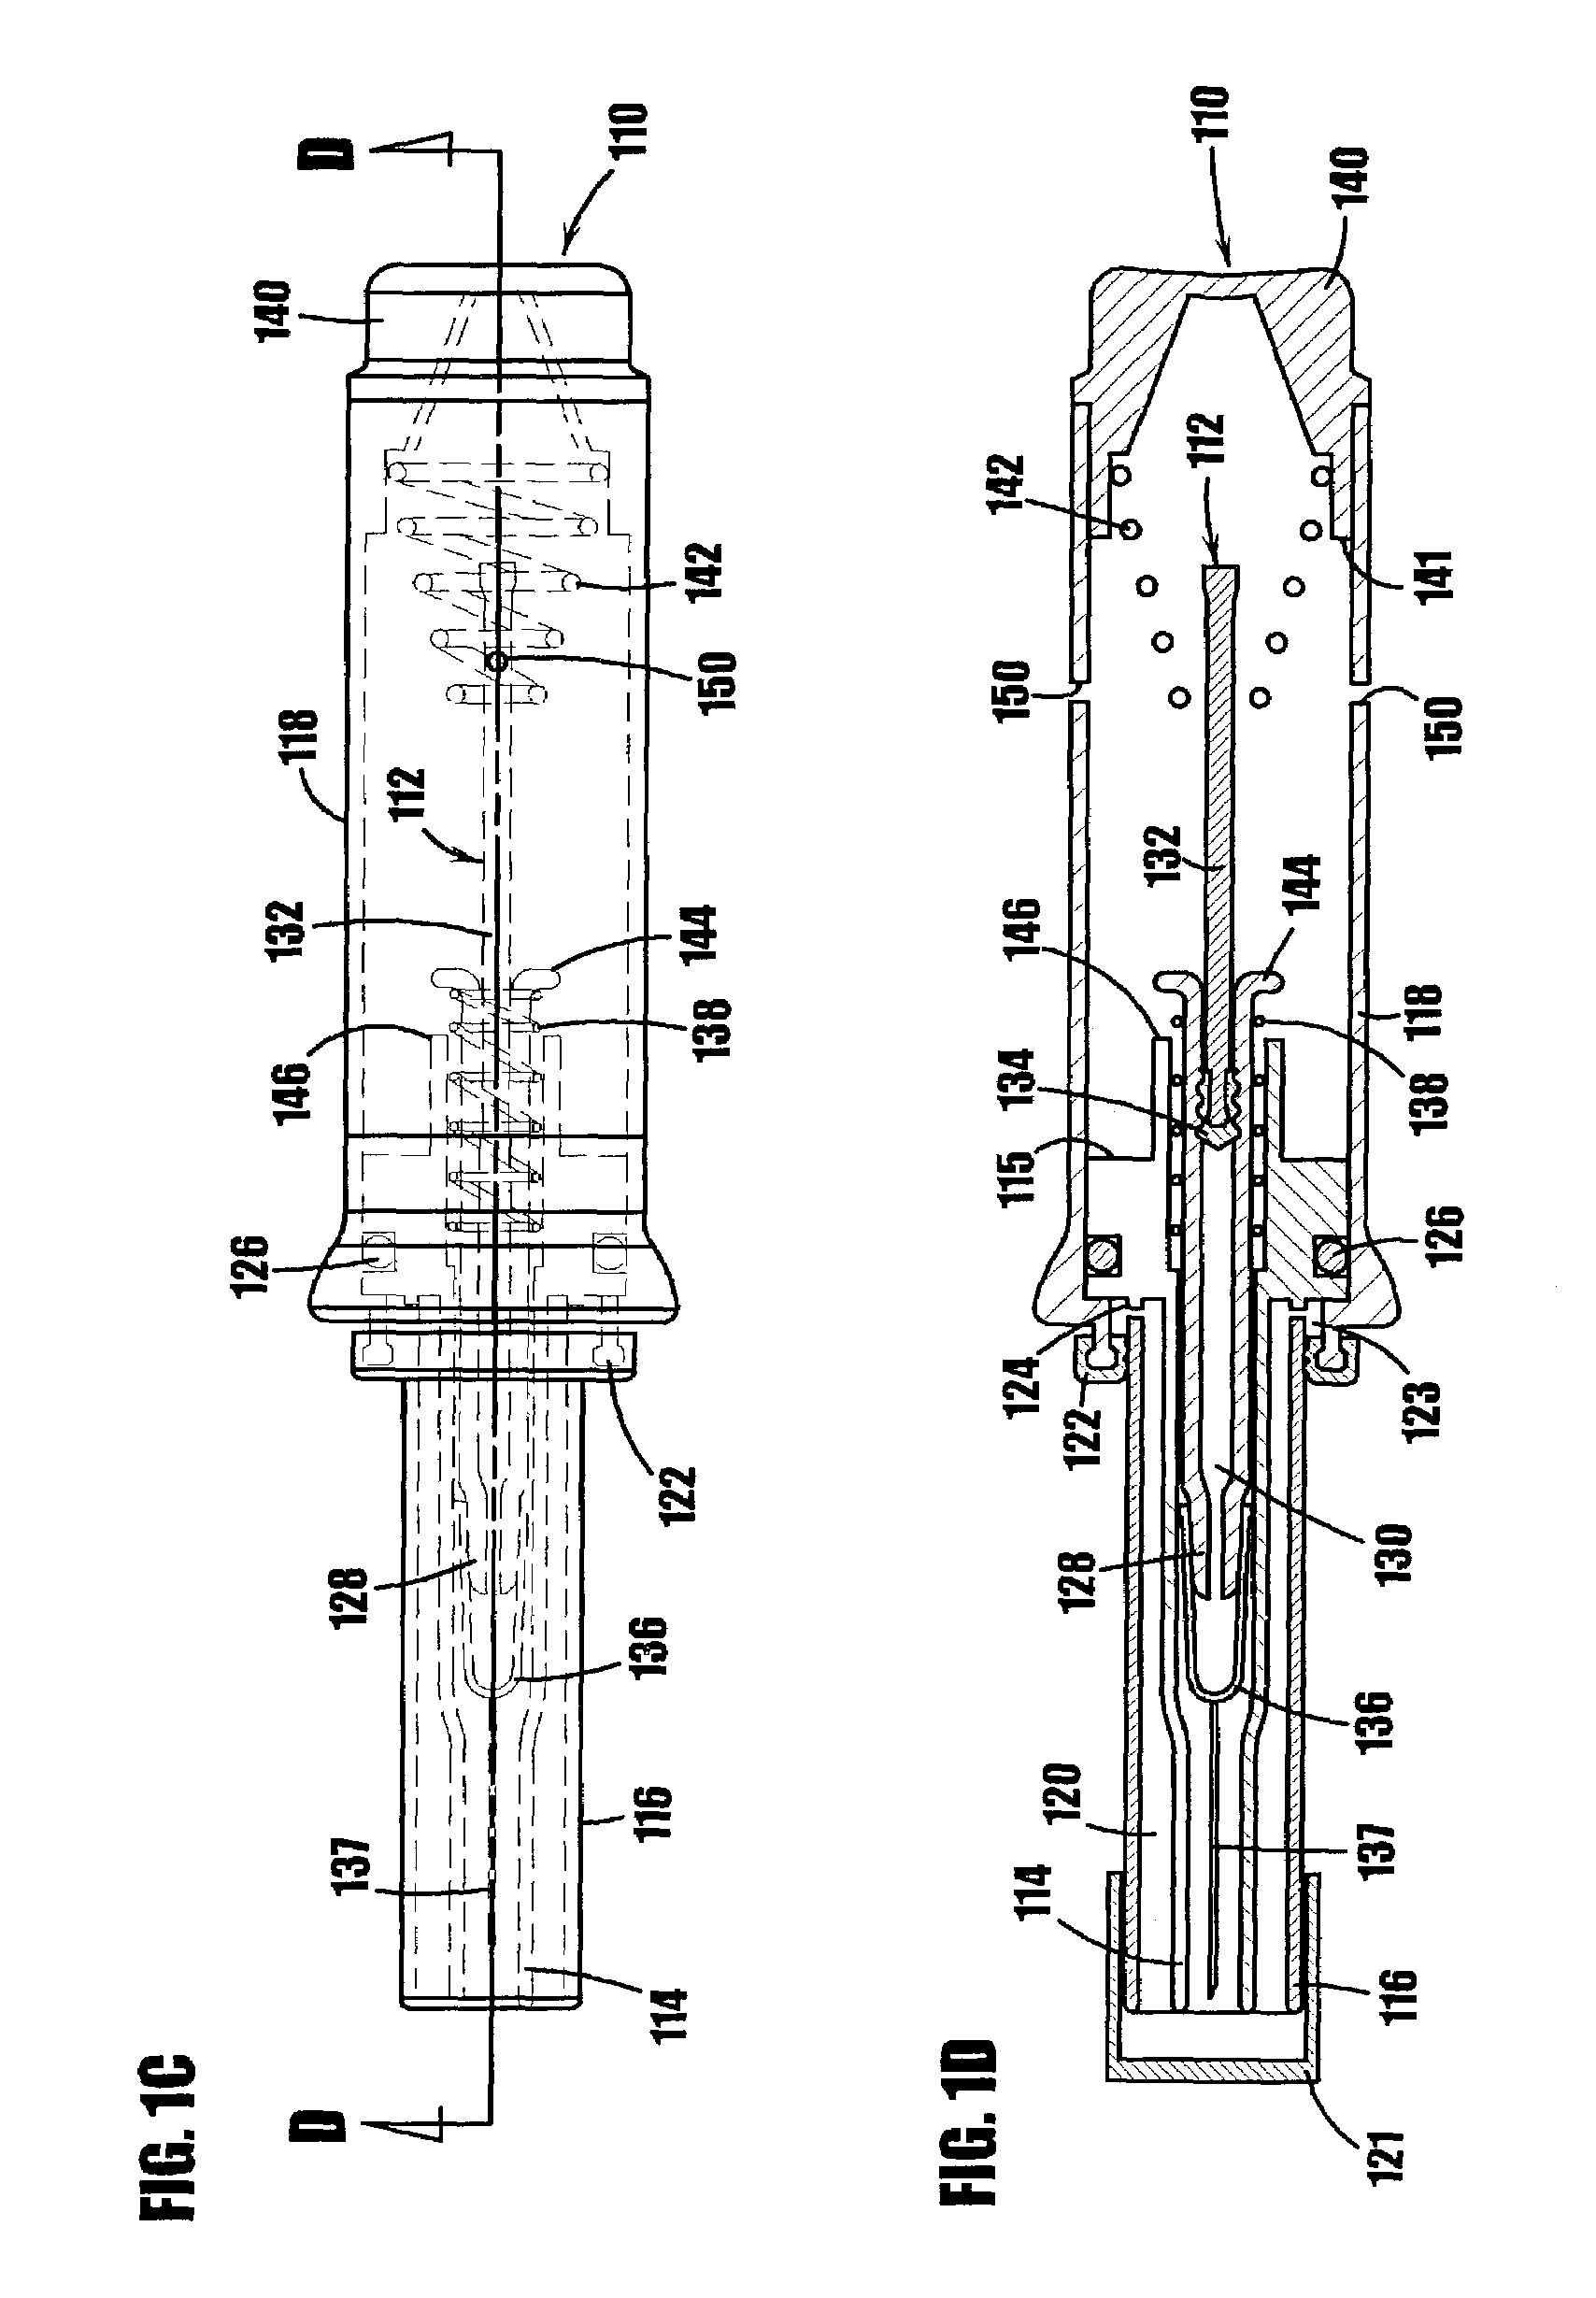 Intradermal delivery device and method